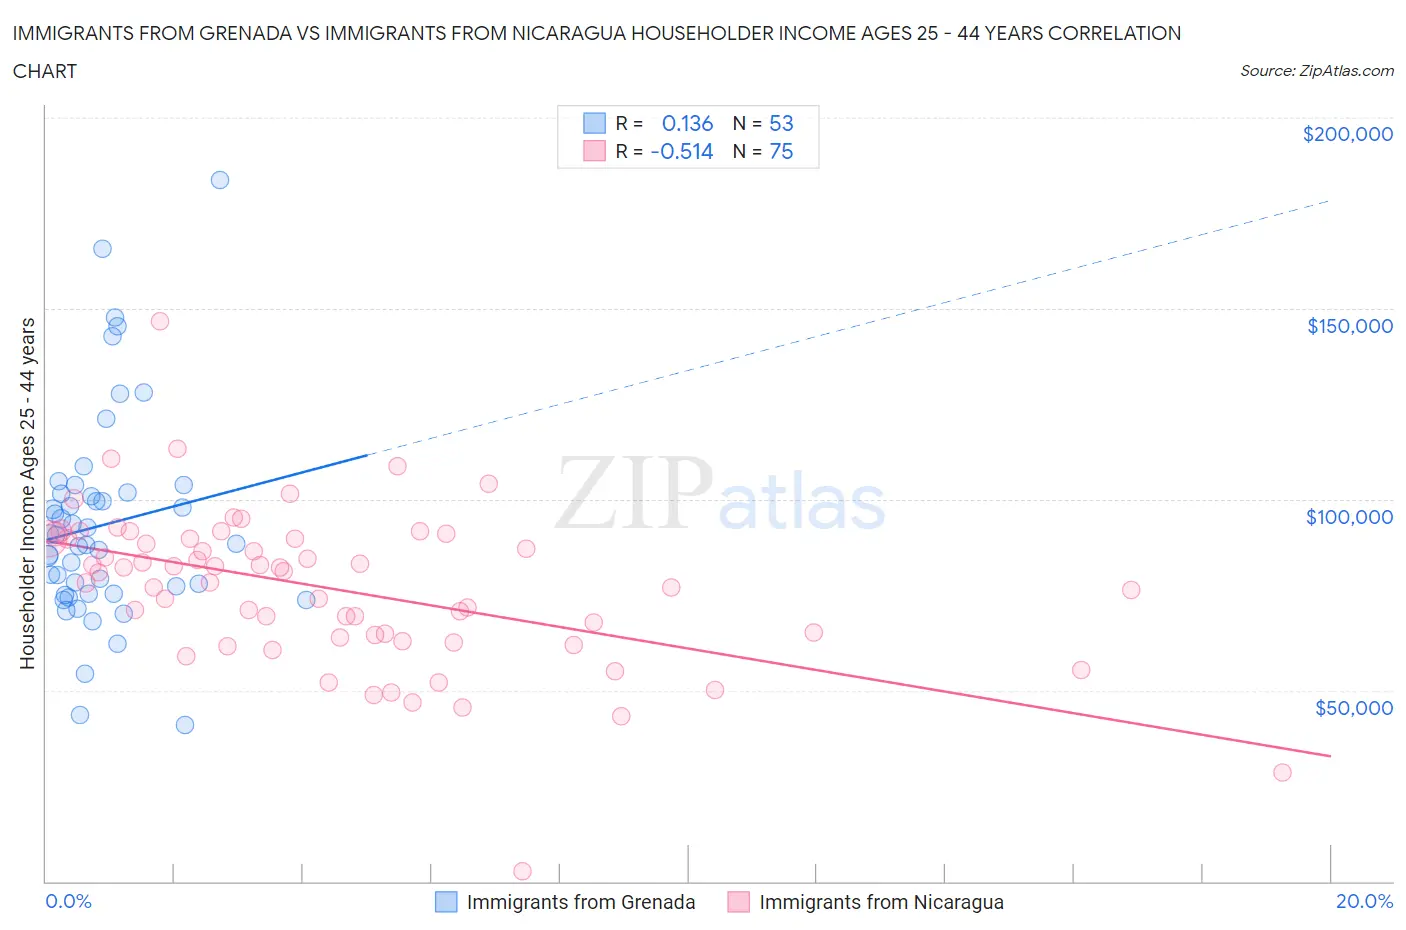 Immigrants from Grenada vs Immigrants from Nicaragua Householder Income Ages 25 - 44 years